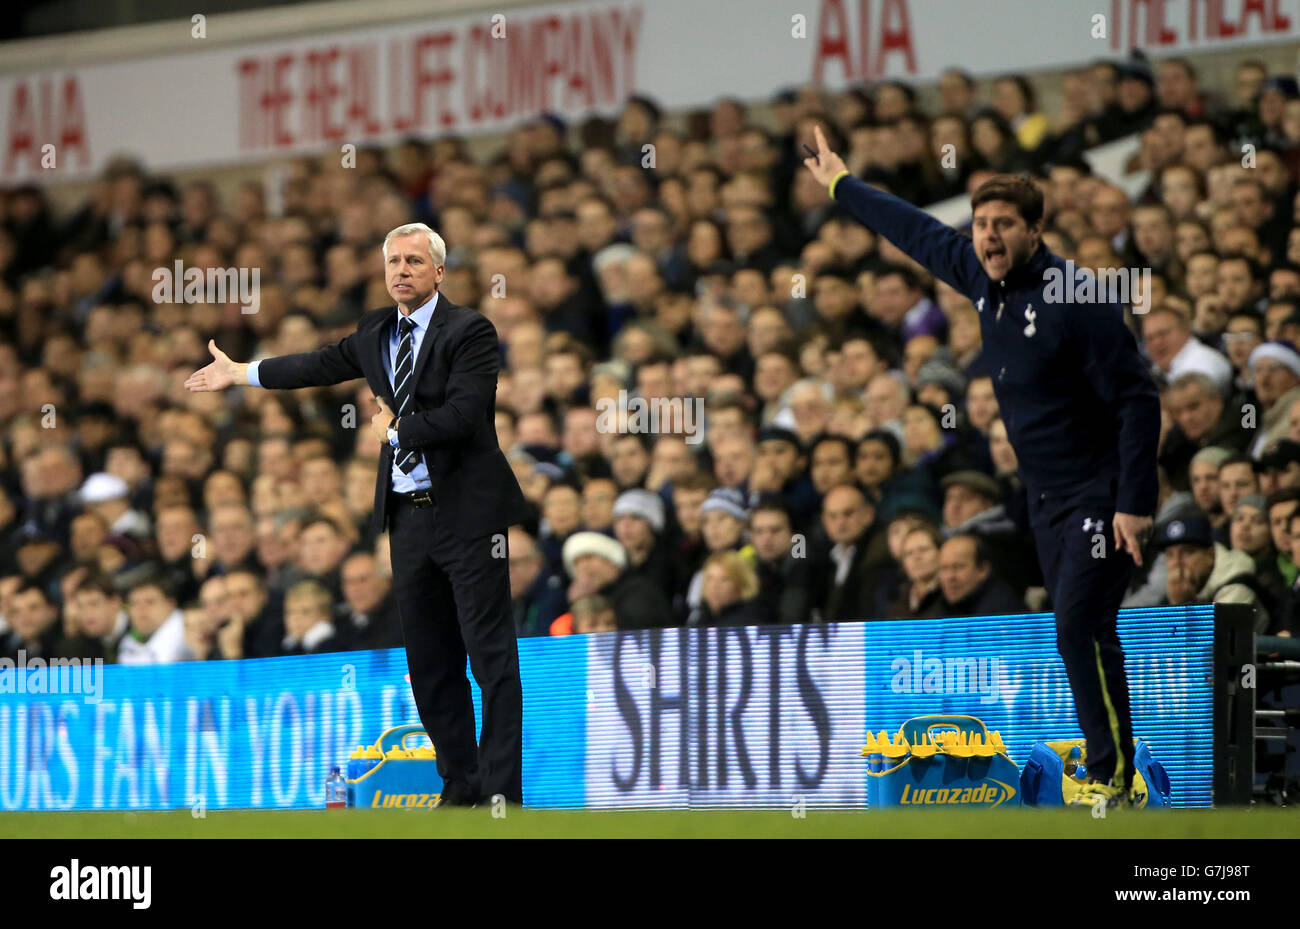 Newcastle United manager Alan Pardew (left) and Tottenham Hotspur manager Mauricio Pochettino (right) on the touchline during the Capital One Cup Quarter Final match at White Hart Lane, London. PRESS ASSOCIATION Photo. Picture date: Wednesday December 17, 2014. See PA story SOCCER Tottenham. Photo credit should read: Nick Potts/PA Wire. RESTRICTIONS: Editorial use only. Maximum 45 images during a match. No video emulation or promotion as 'live'. No use in games, competitions, merchandise, betting or single club/player services. No use with unofficial audio, video, data, fixtures or Stock Photo